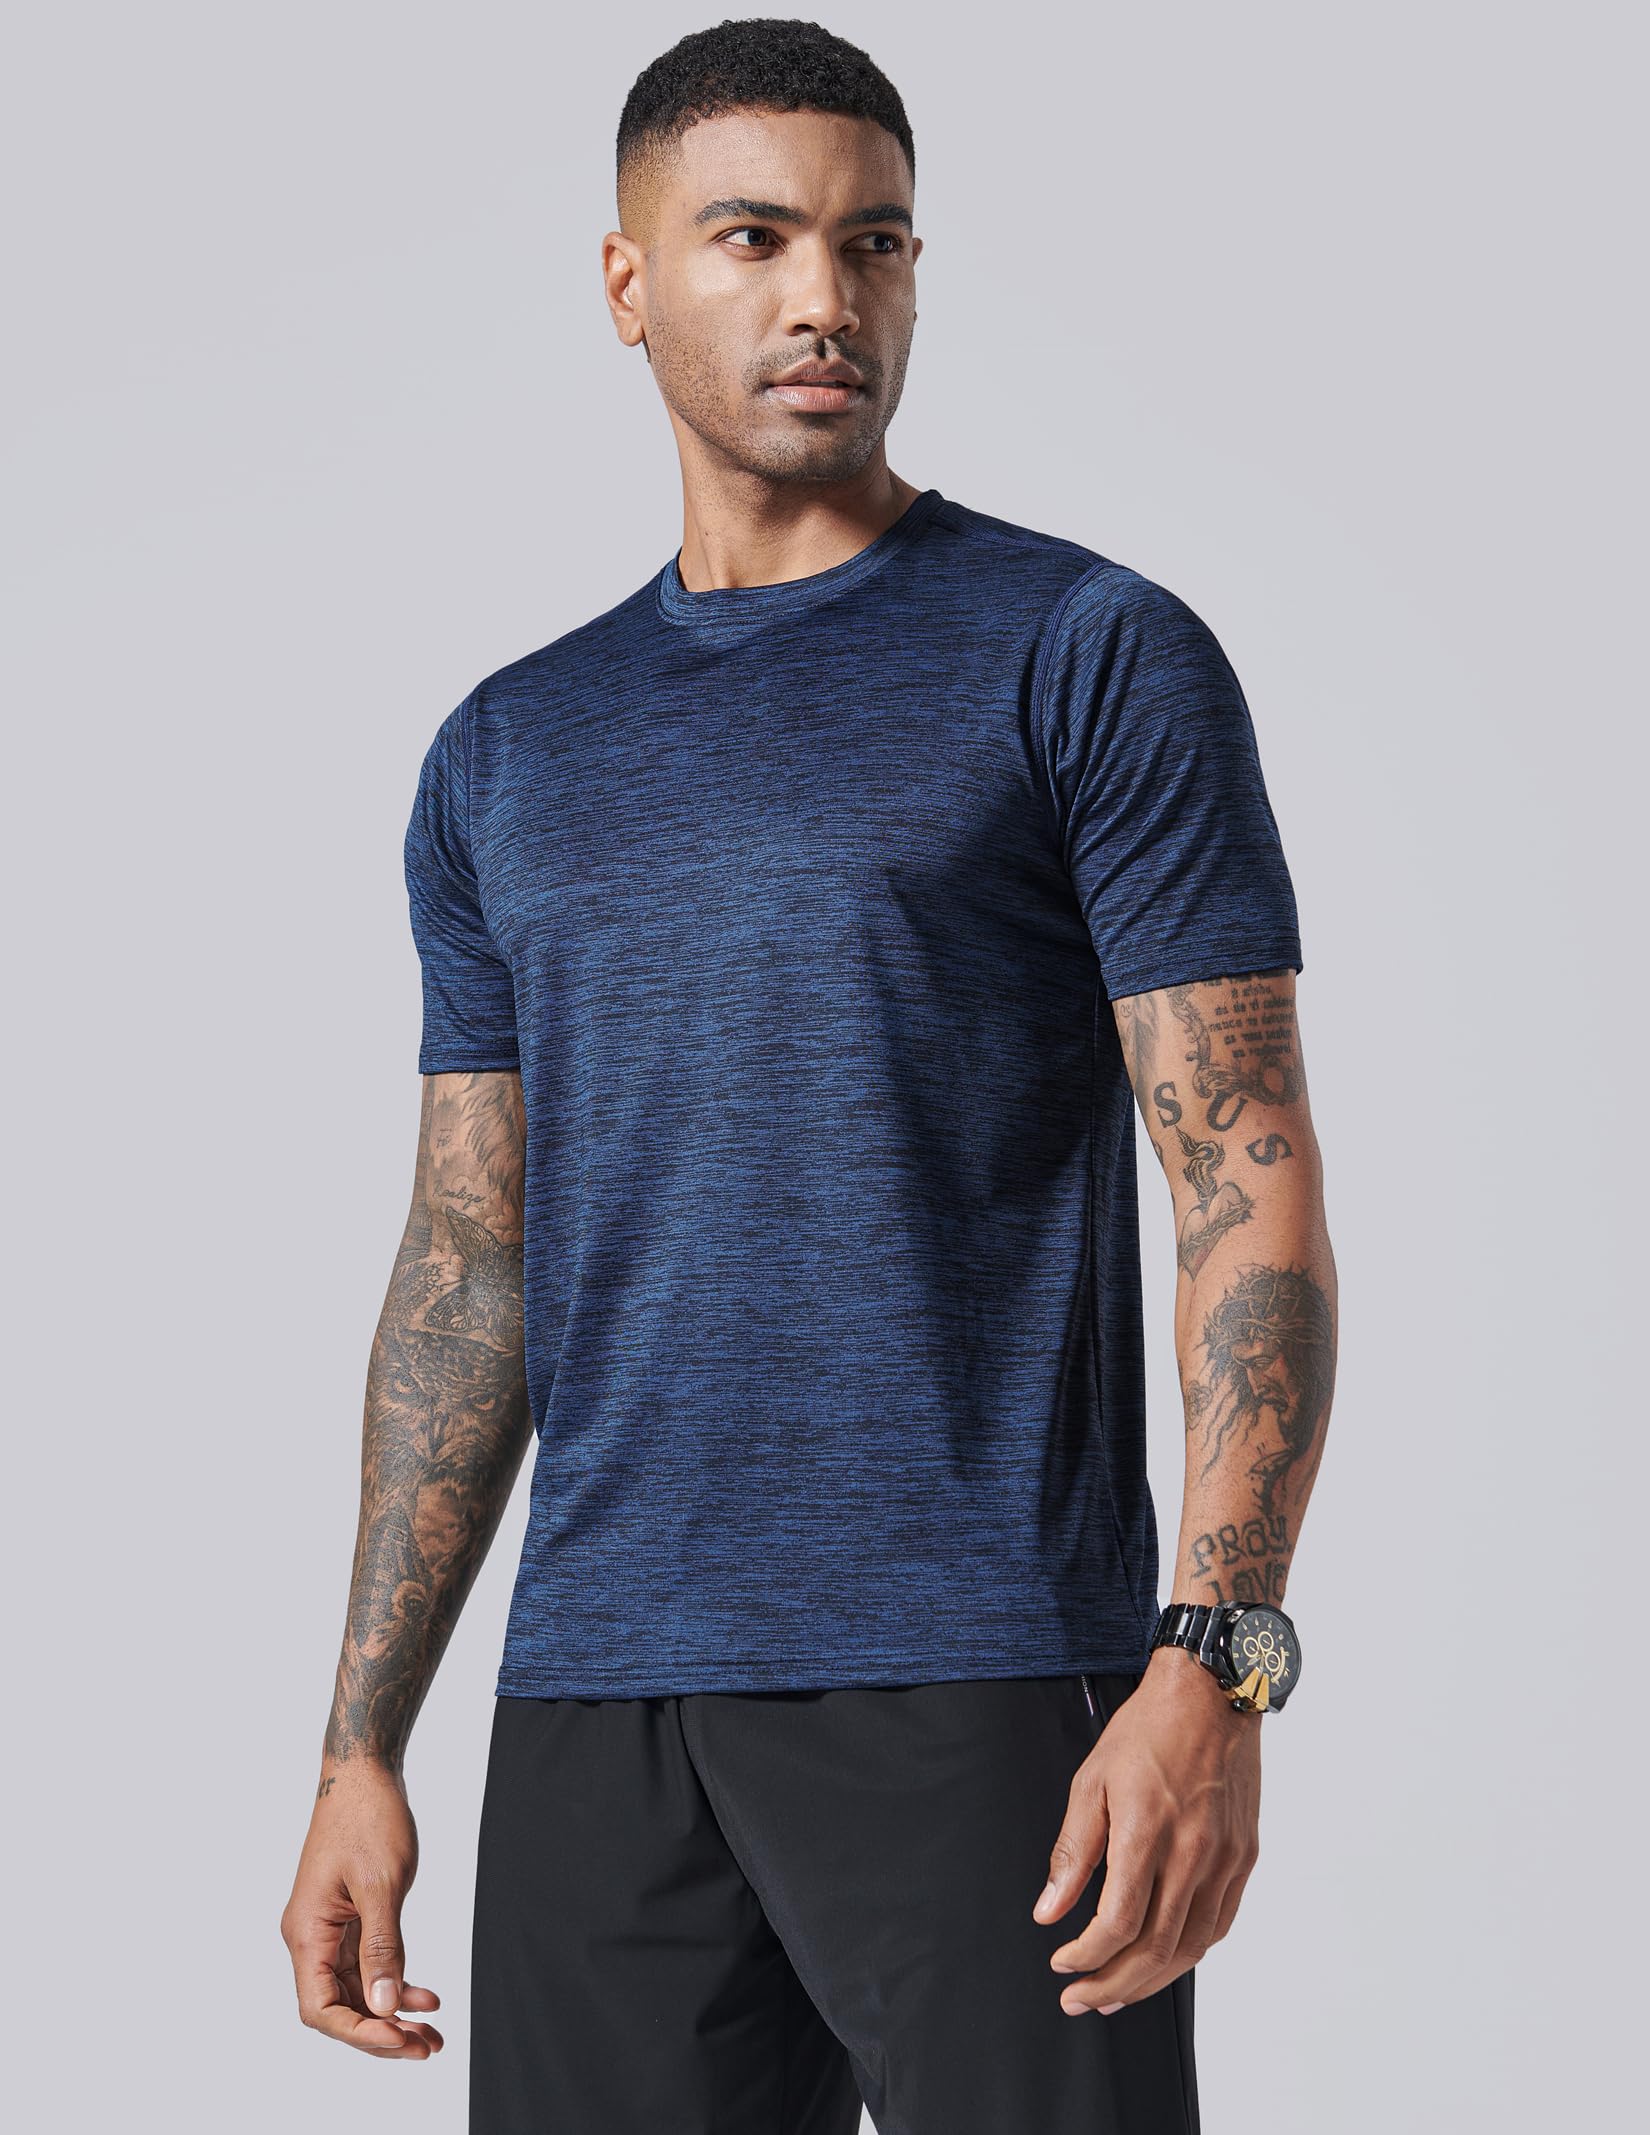 5 Pack Men’s Active Quick Dry Crew Neck T Shirts | Athletic Running Gym Workout Short Sleeve Tee Tops Bulk (Set 1, 3X-Large)